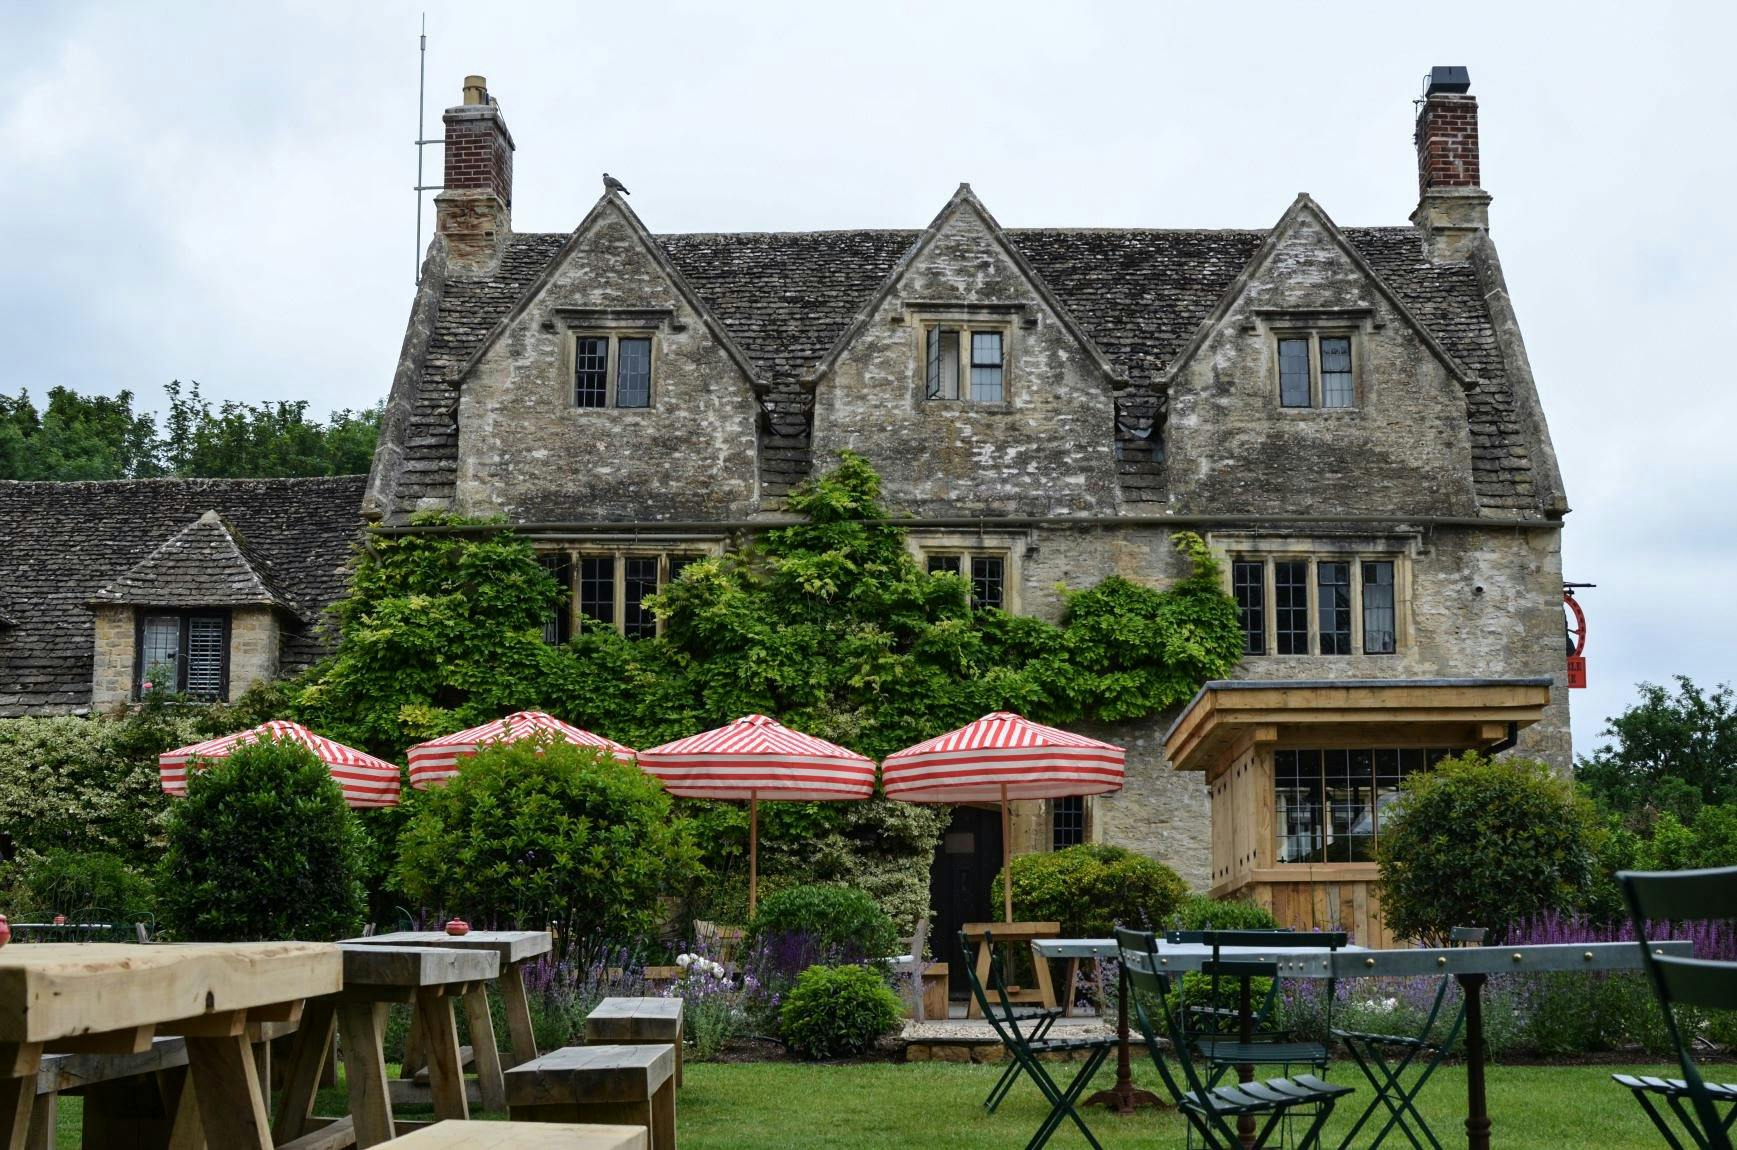 <p>The Double Red Duke is a 16th-century hotel and restaurant in the Cotswold village of Clanfield, Oxfordshire. It is part of the Country Creatures group, founded by Georgie and Sam Pearman. The hotel has 19 cosy and elegant rooms, a garden with terrace, and a spa. </p><p><br></p><p>The restaurant serves local produce and seasonal dishes, and has a chef’s counter where guests can watch the cooking. The Double Red Duke has received positive reviews from various media outlets, such as The Telegraph, The Times, and Country Life. </p><p><br></p><p>It is also a convenient base to explore nearby attractions, such as Kelmscott Manor, the River Thames, and Bampton.</p>